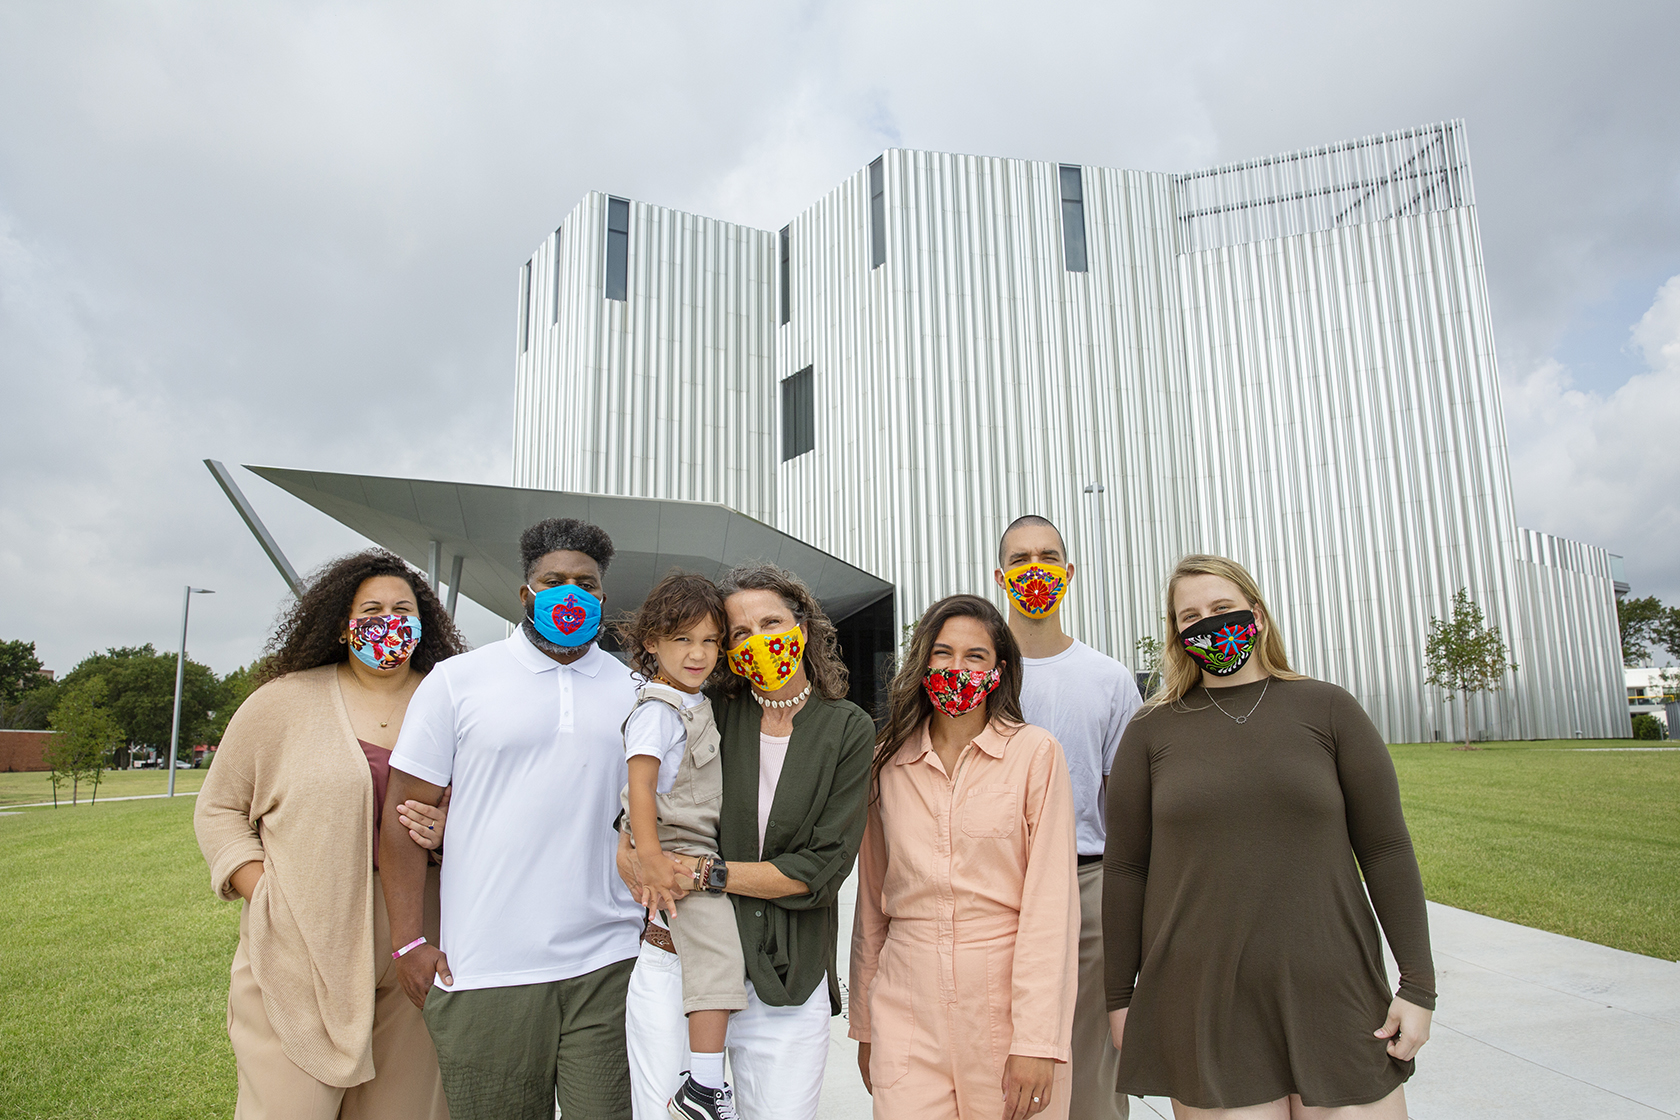 Several people wearing brightly colored face coverings stand together in front a tall silver aluminum building.